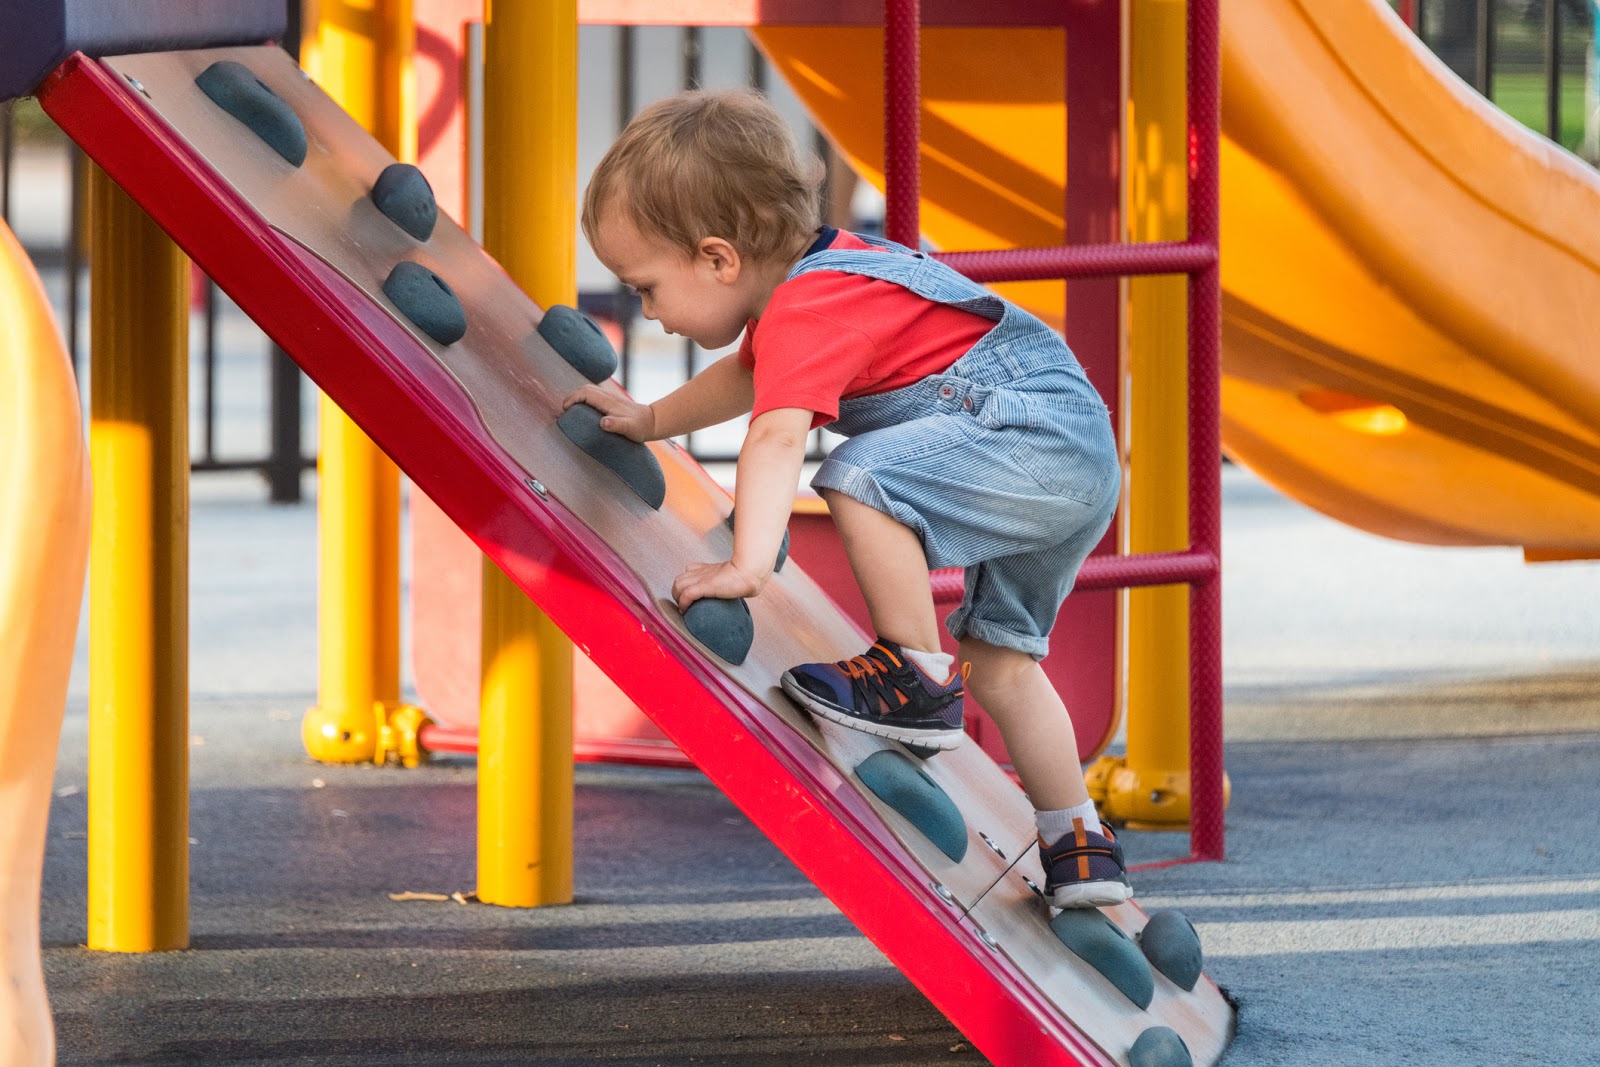 Jumping: A Significant Gross Motor Skill - BabySparks